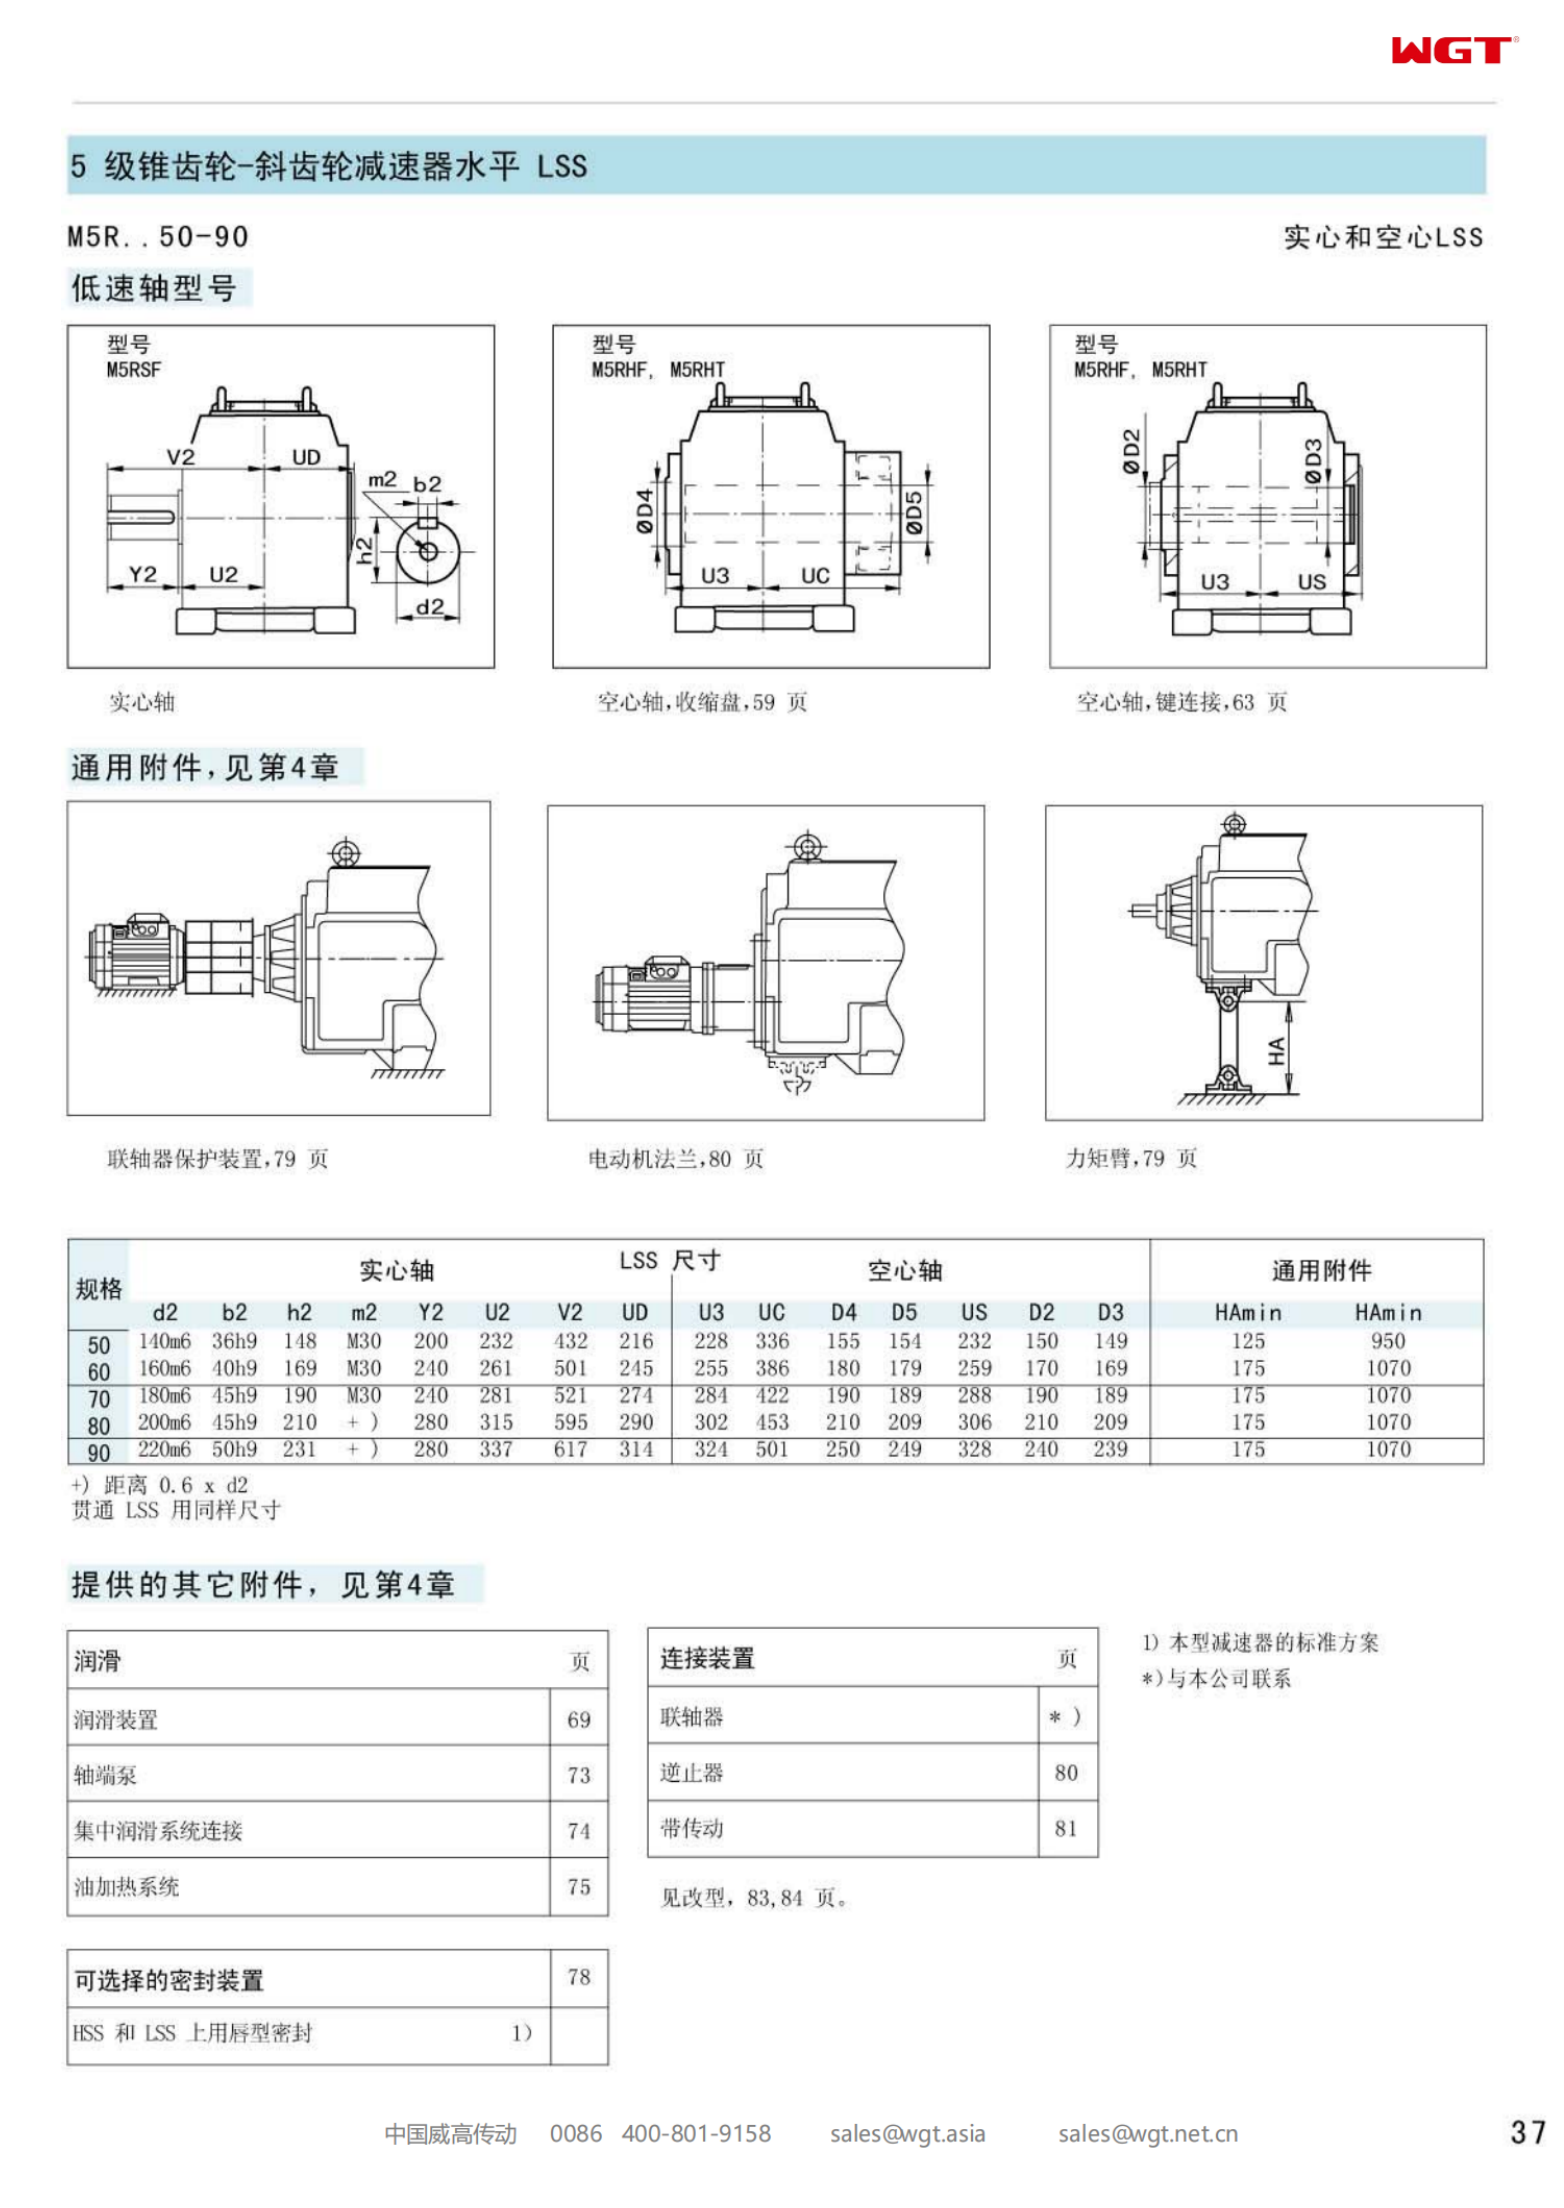 M5RHF80 Replace_SEW_M_Series Gearbox